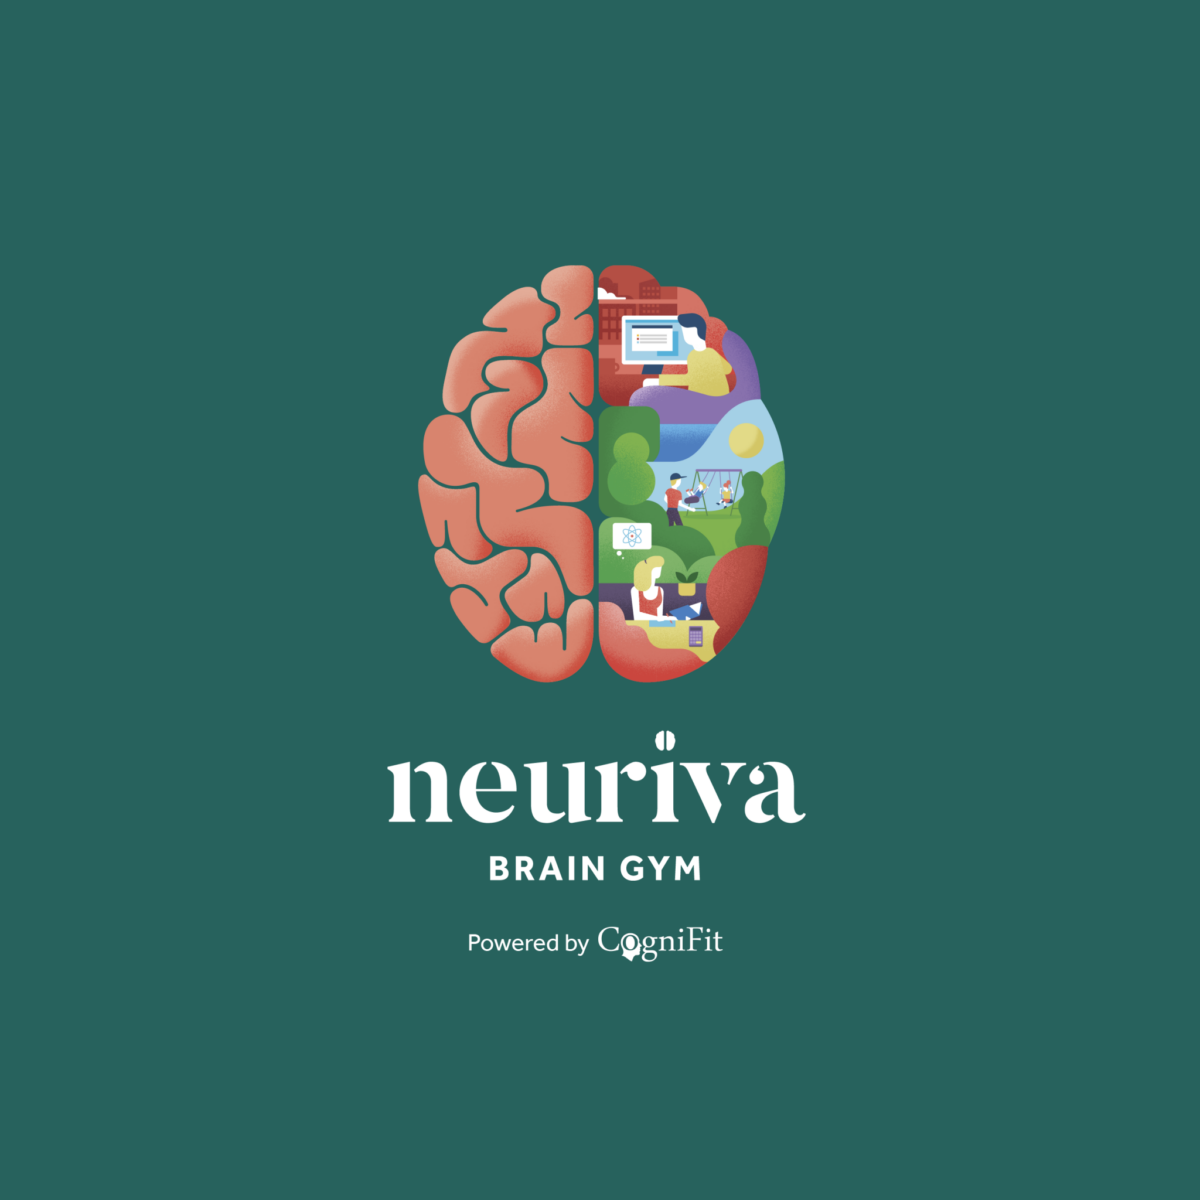 Neuriva by CogniFit